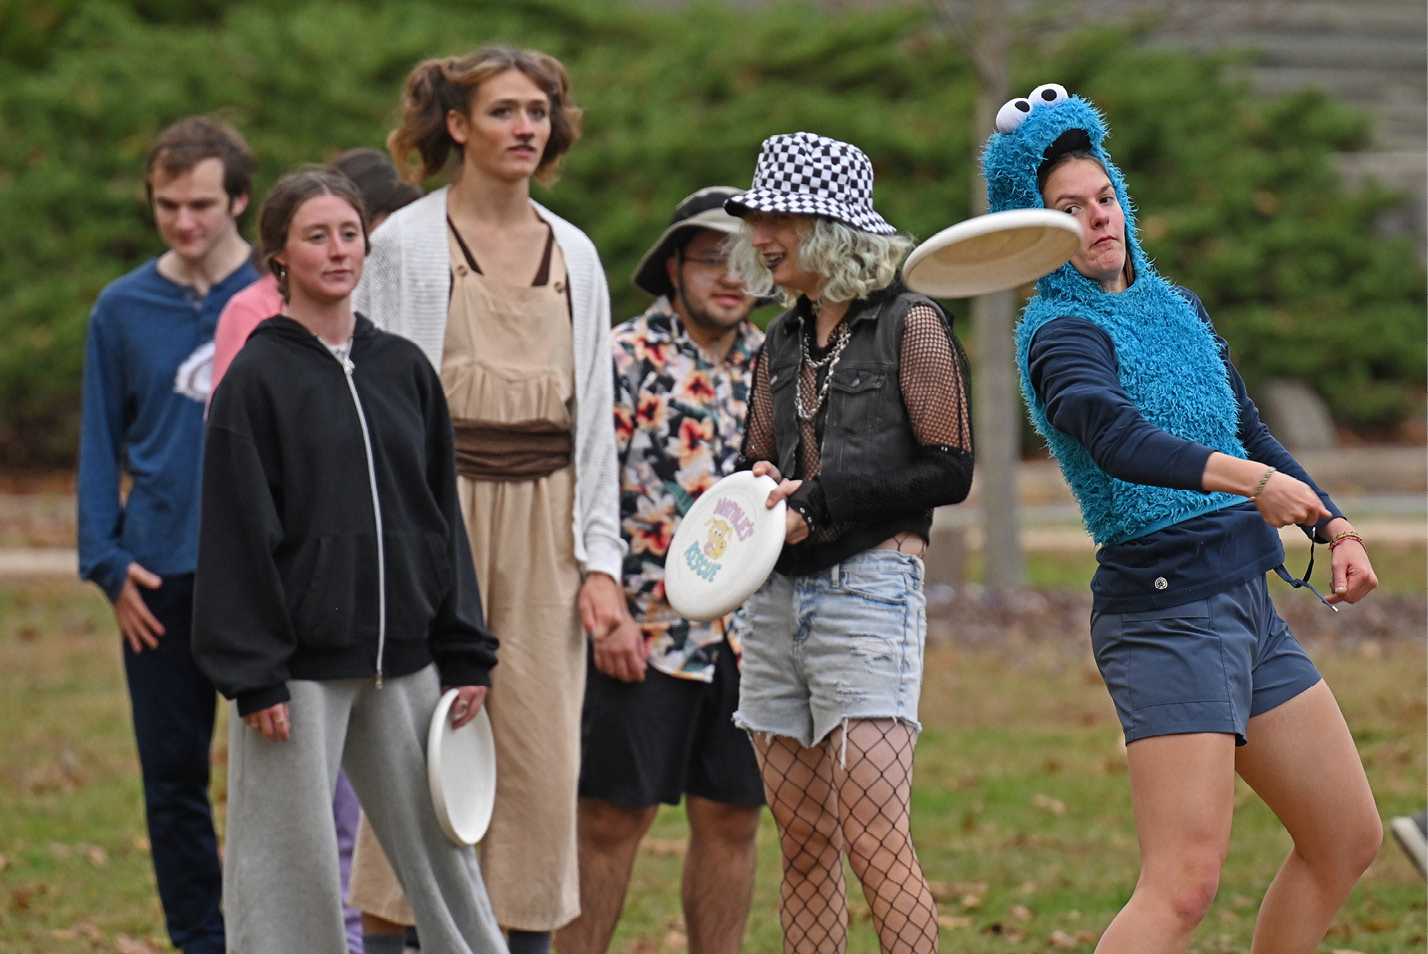 The Men’s and Women’s and non-binary Disc Clubs practiced in costumes for Halloween.